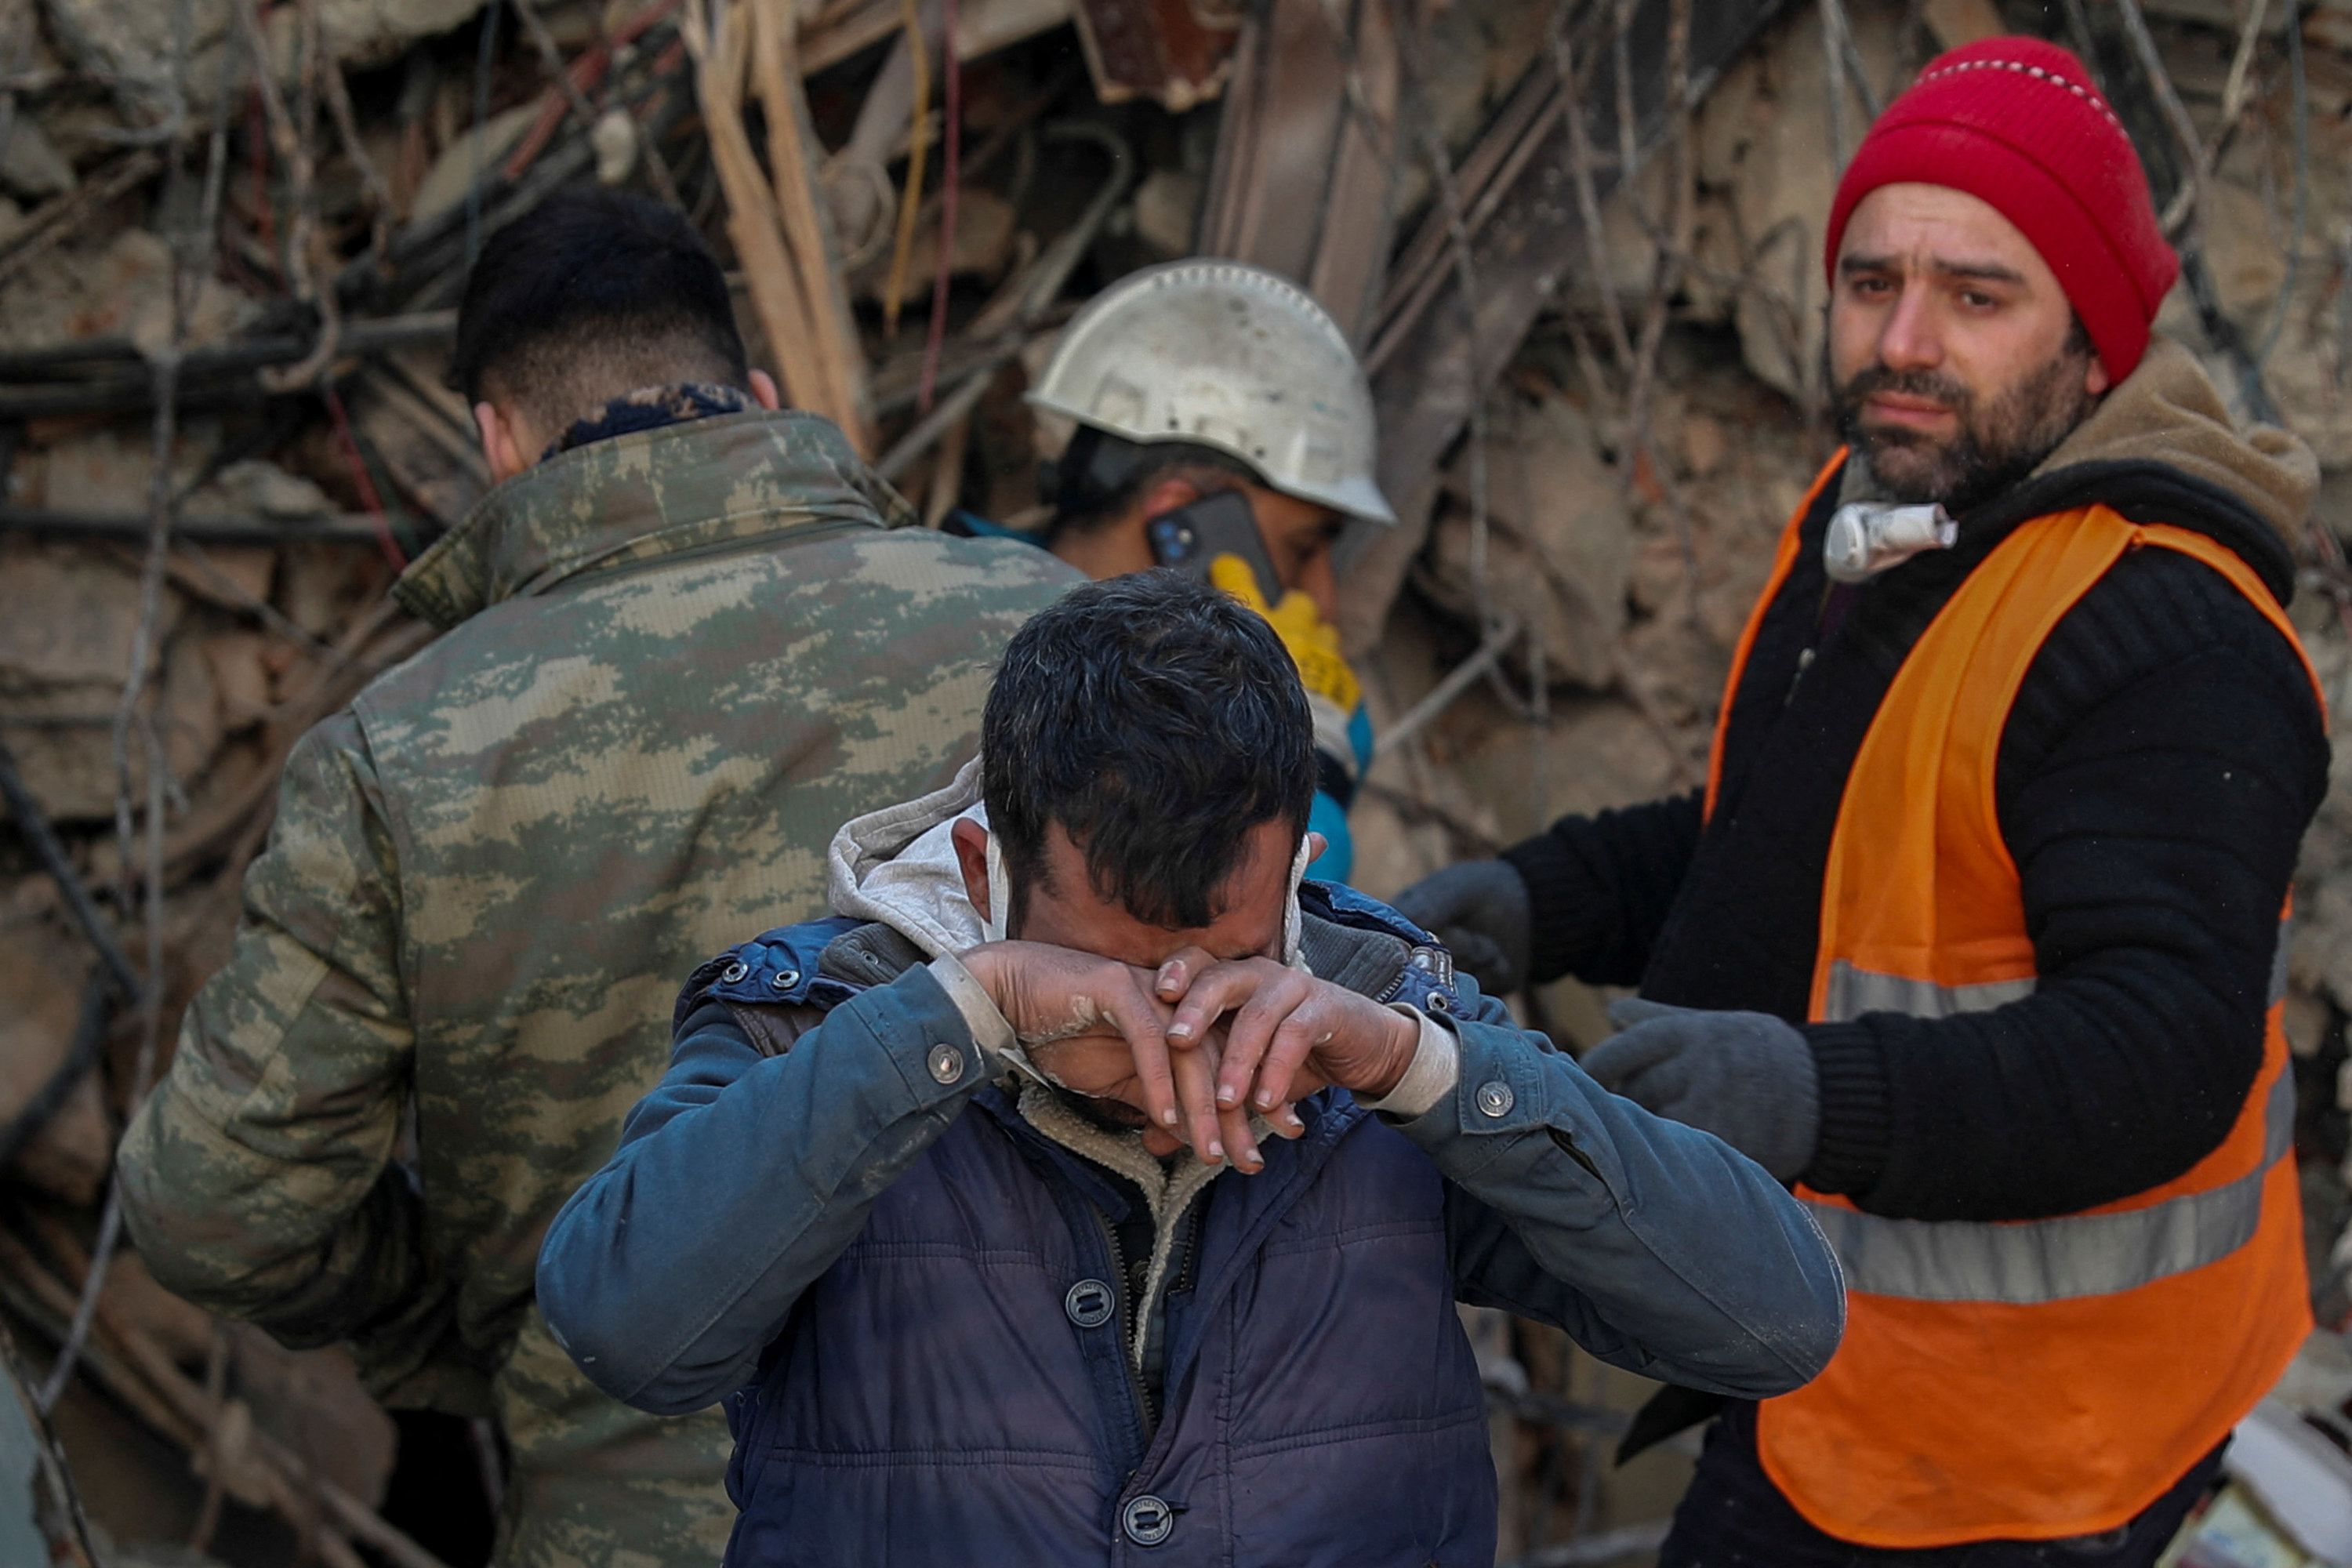 A man covers his eyes as two men stand behind him in front of rubble